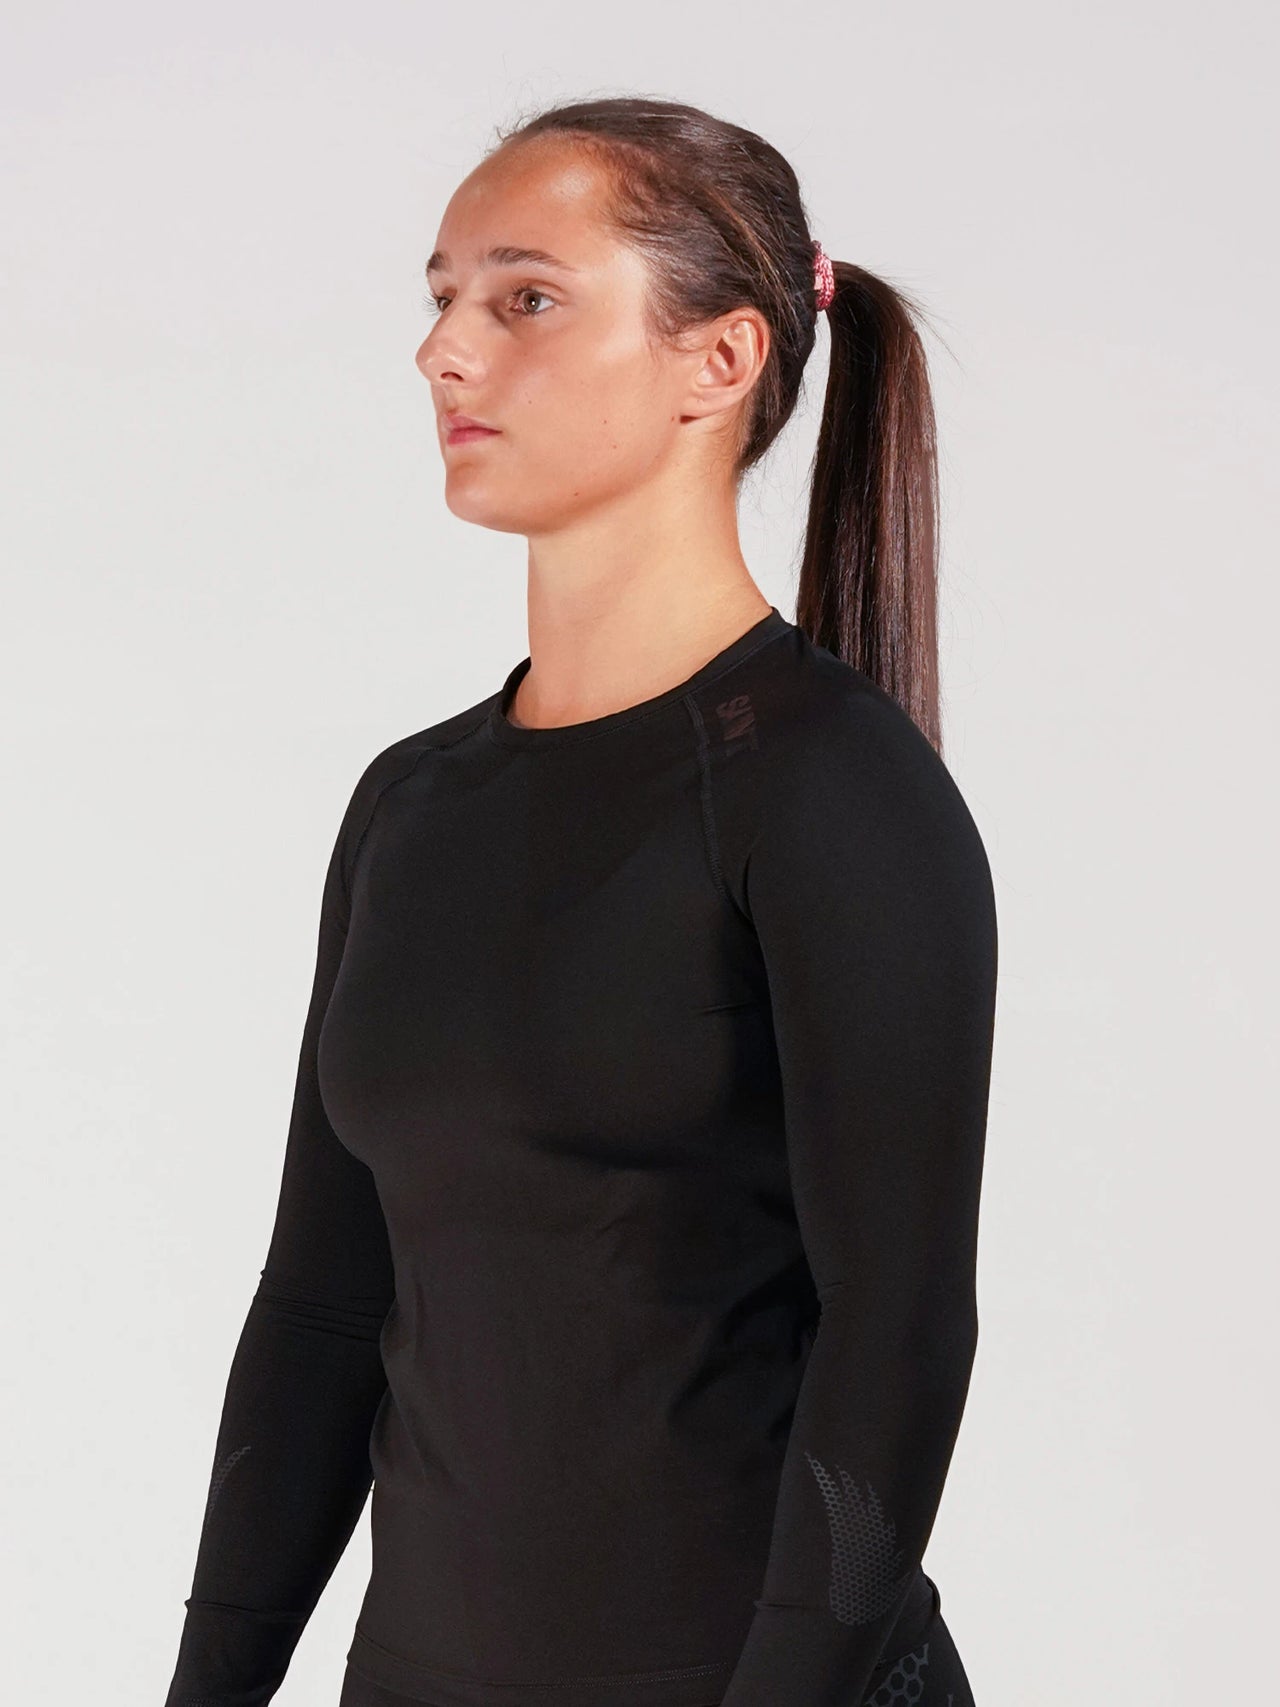 Women's Performance Compression Top